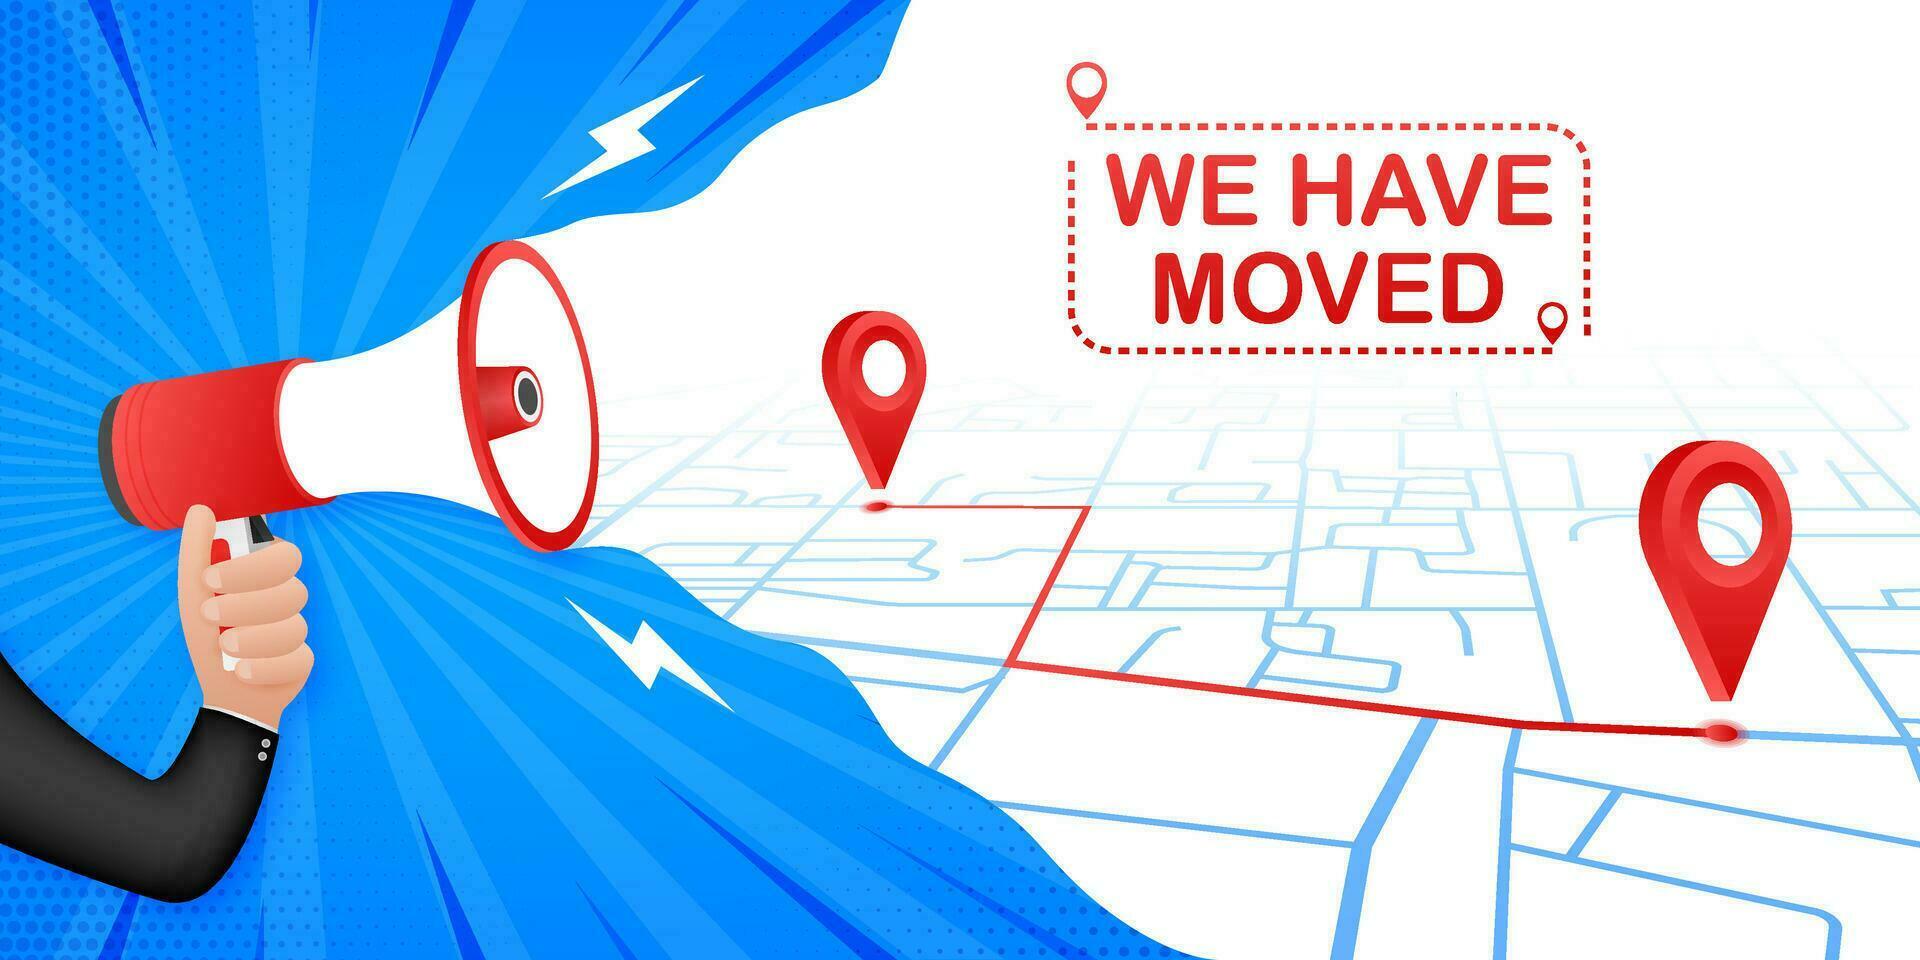 We have moved. Moving office sign. Clipart image isolated on red background. Vector stock illustration